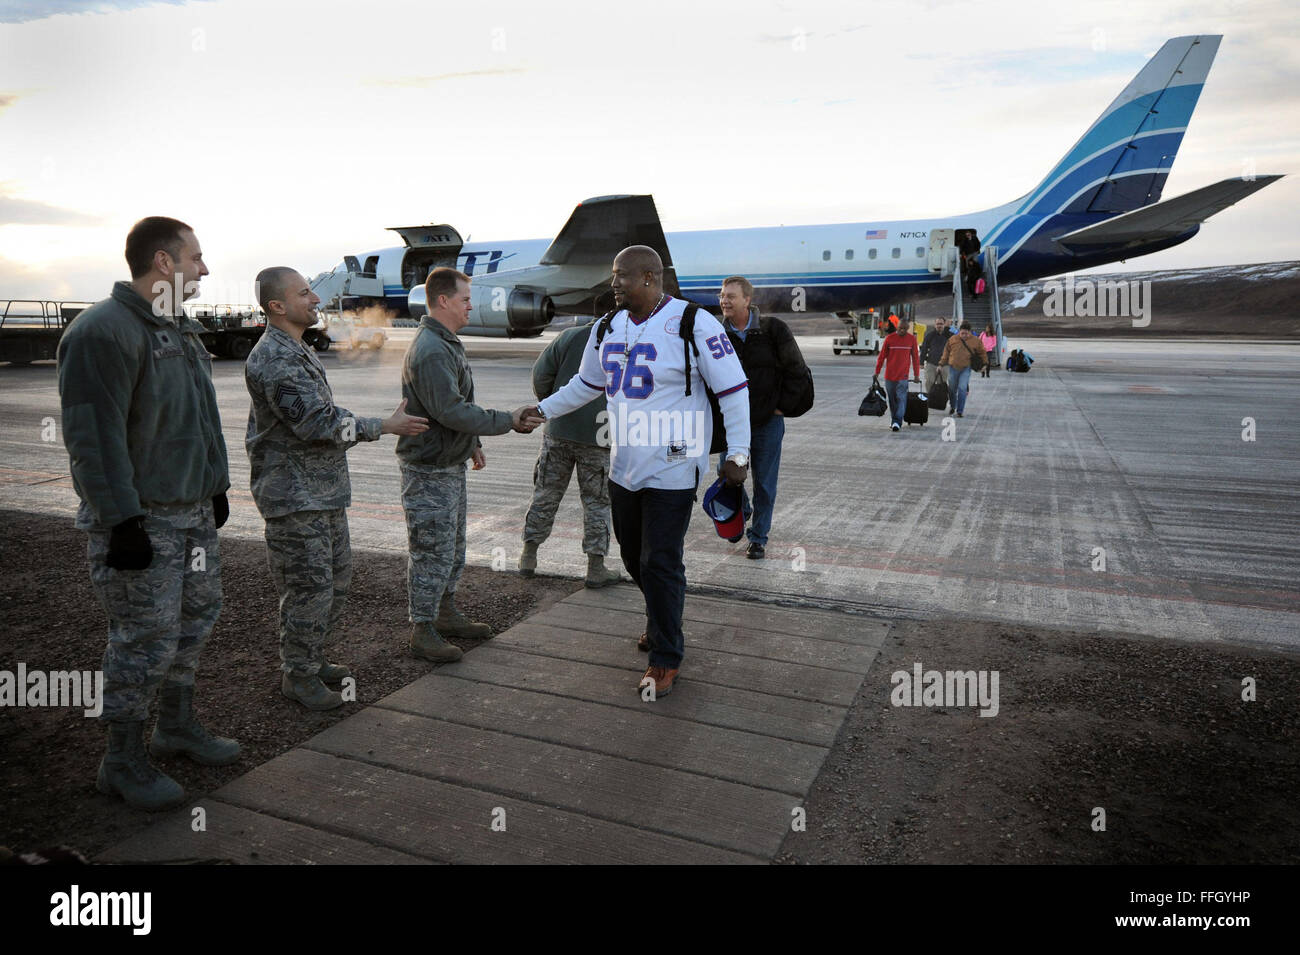 Base leaders greet military and civilian personnel as they arrive at Thule AB via a contracted Douglas DC-8. The DC-8 travels weekly to Thule AB to transport both supplies and personnel. The air base is the military's most northern installation, located 750 miles north of the Arctic Circle. Stock Photo